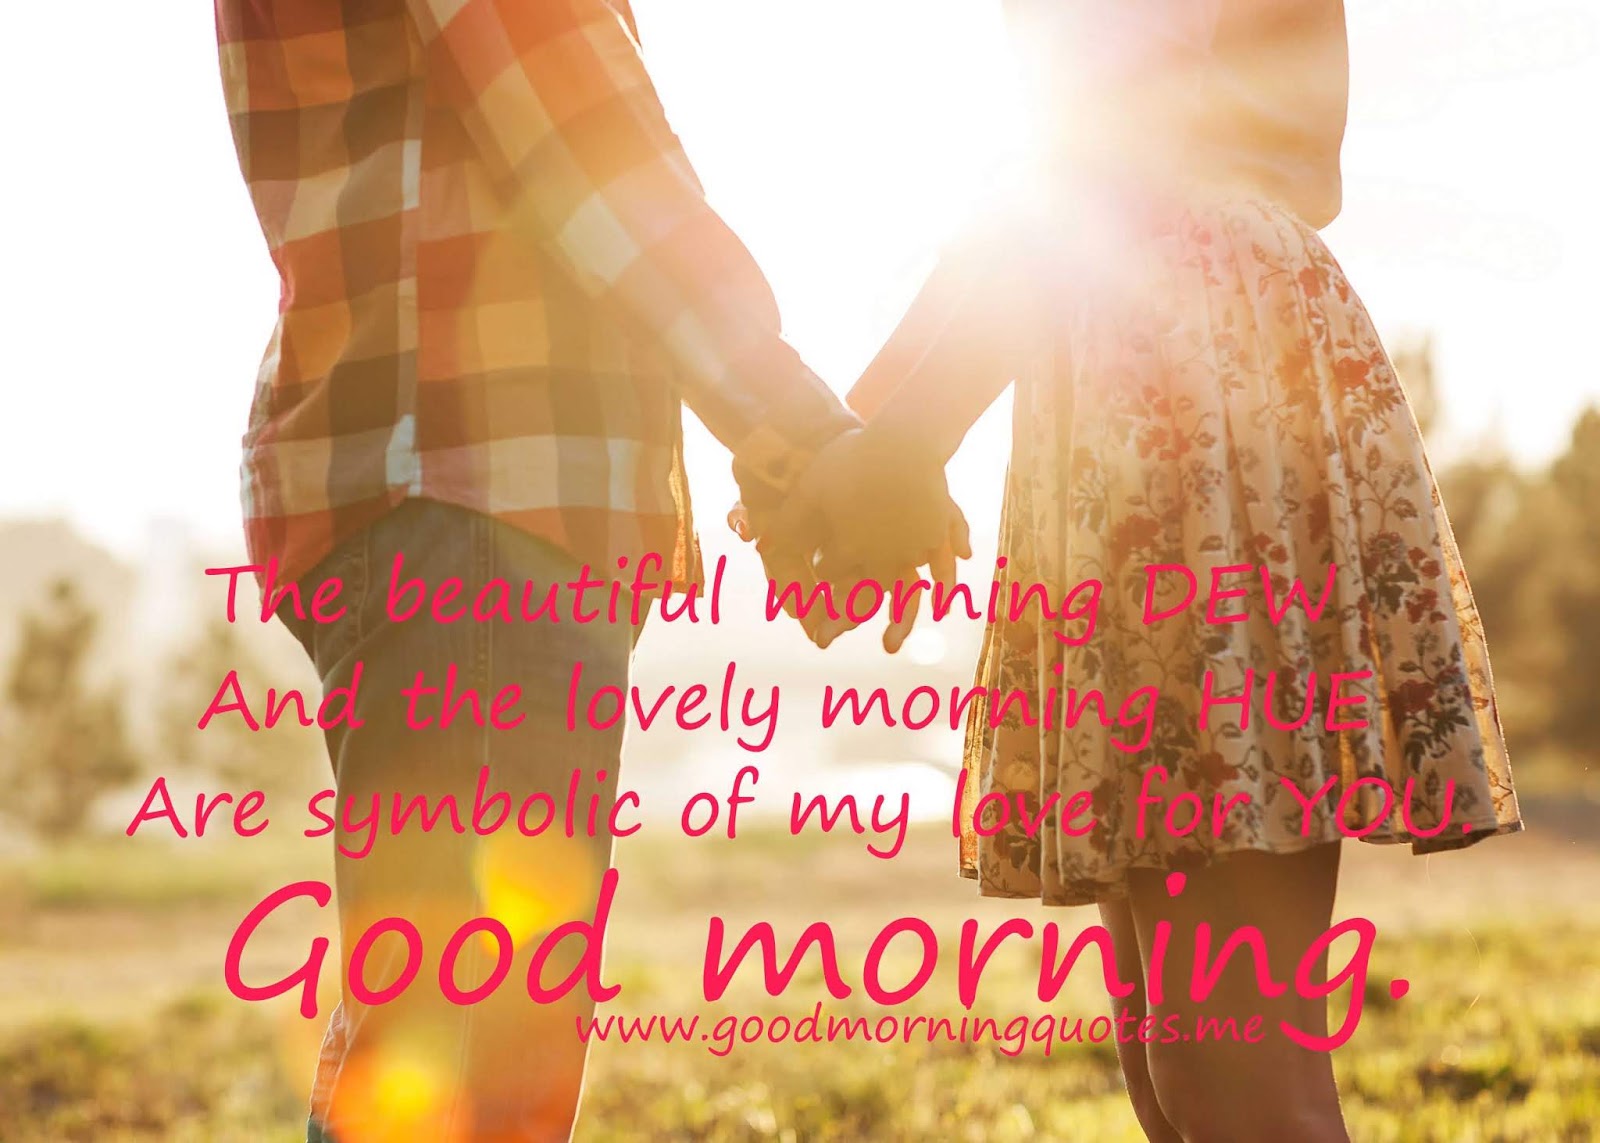 Romantic Good Morning Images Wallpaper Pictures Hd